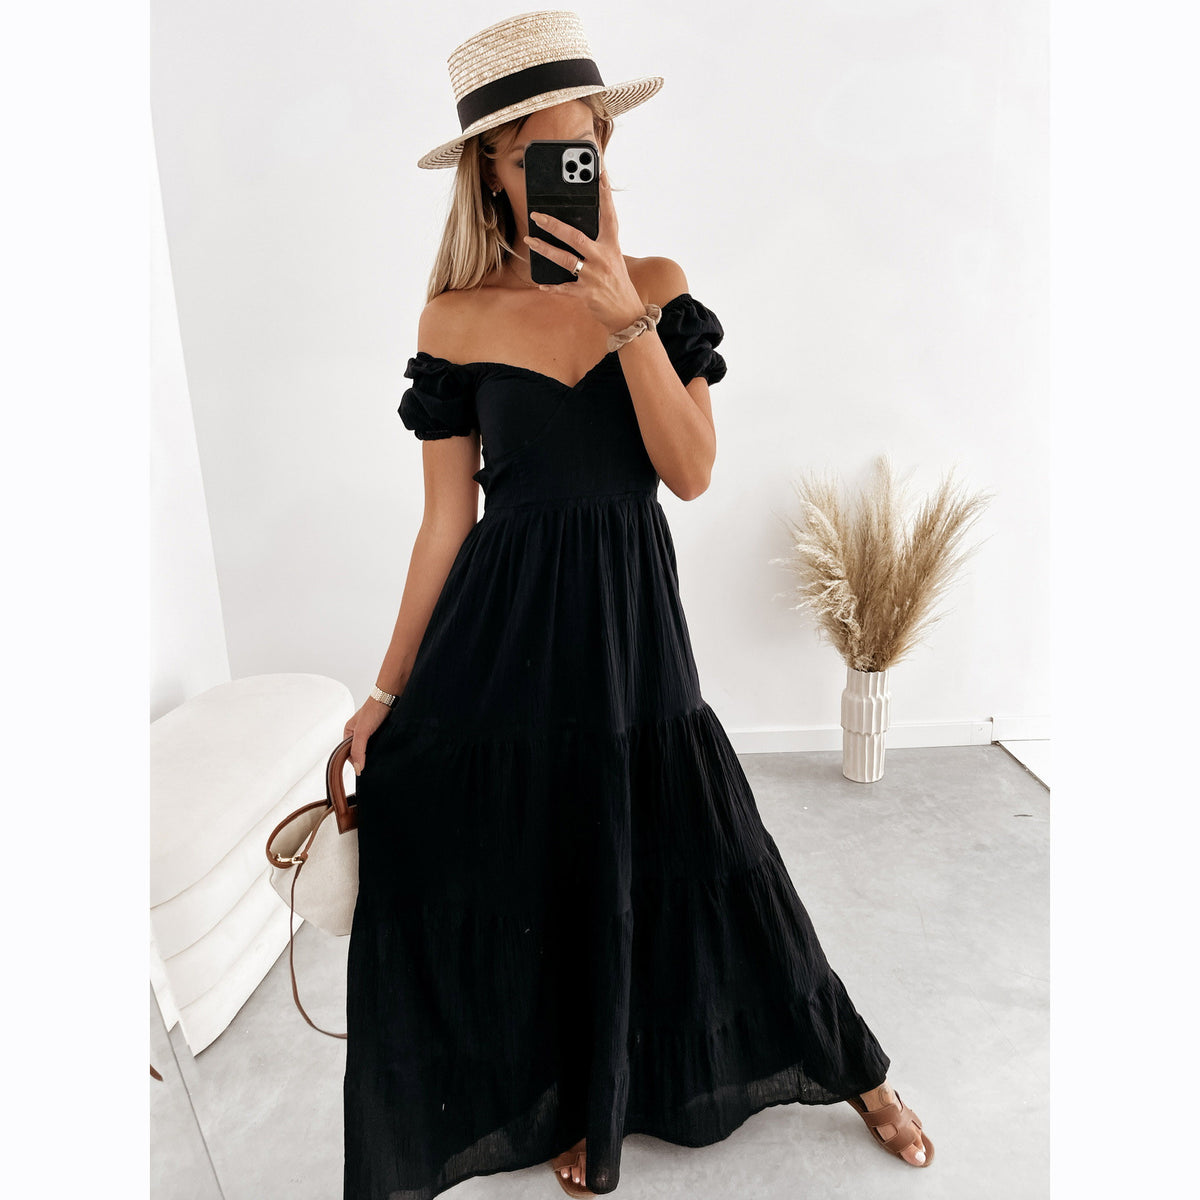 2021 Summer Sun Protection Short Sleeve Strapless Solid Color Backless Lace up Temperament Commute High Waist Dress